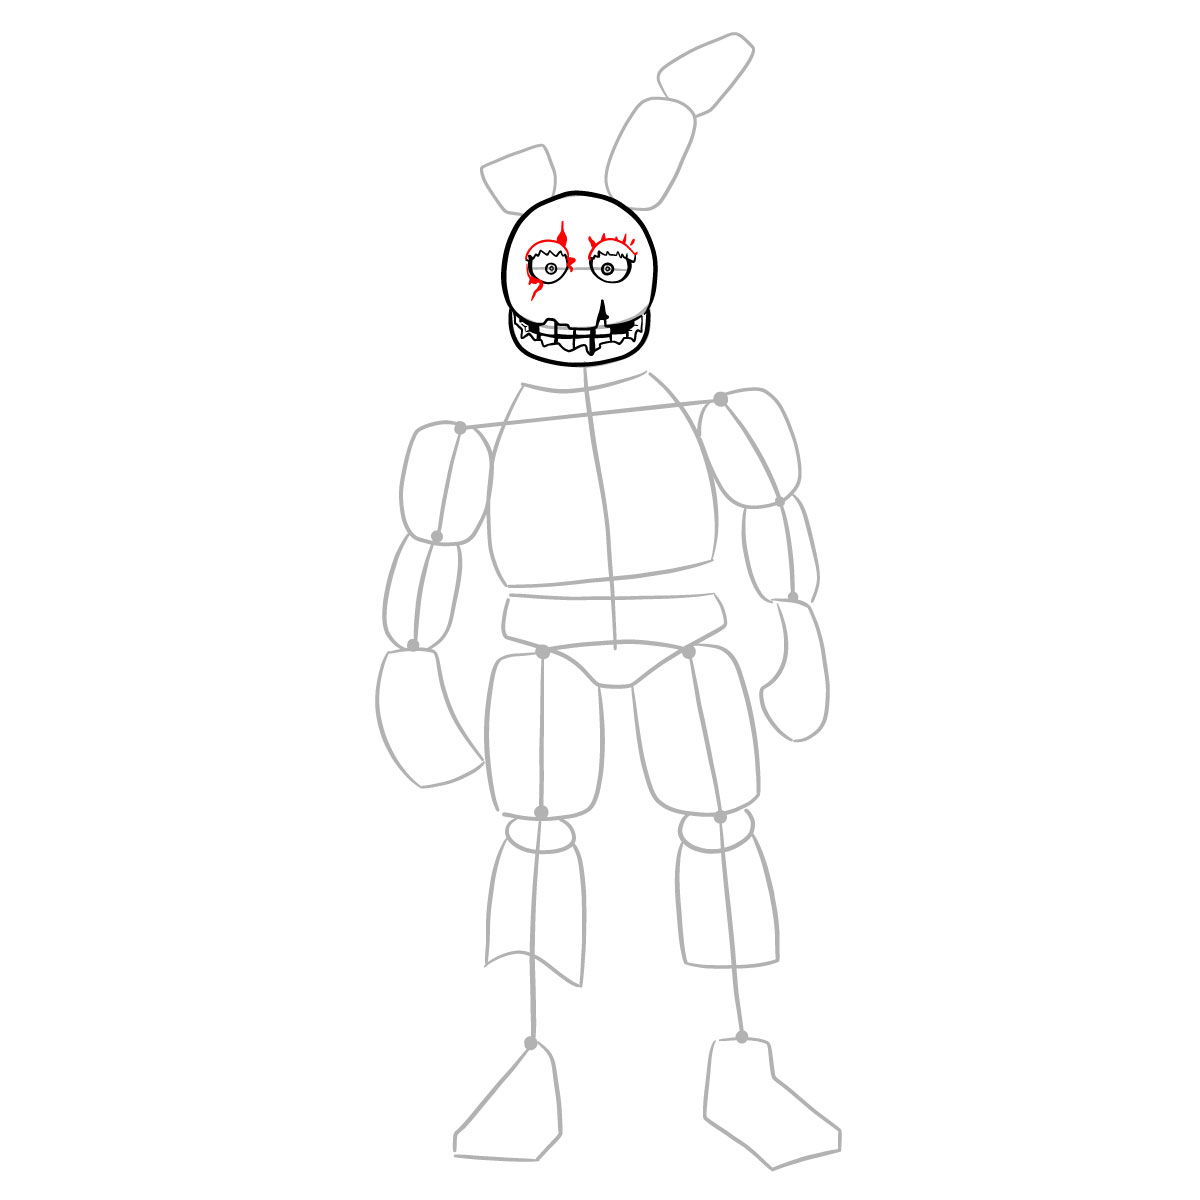 How to draw Springtrap from FNAF 3 - step 11